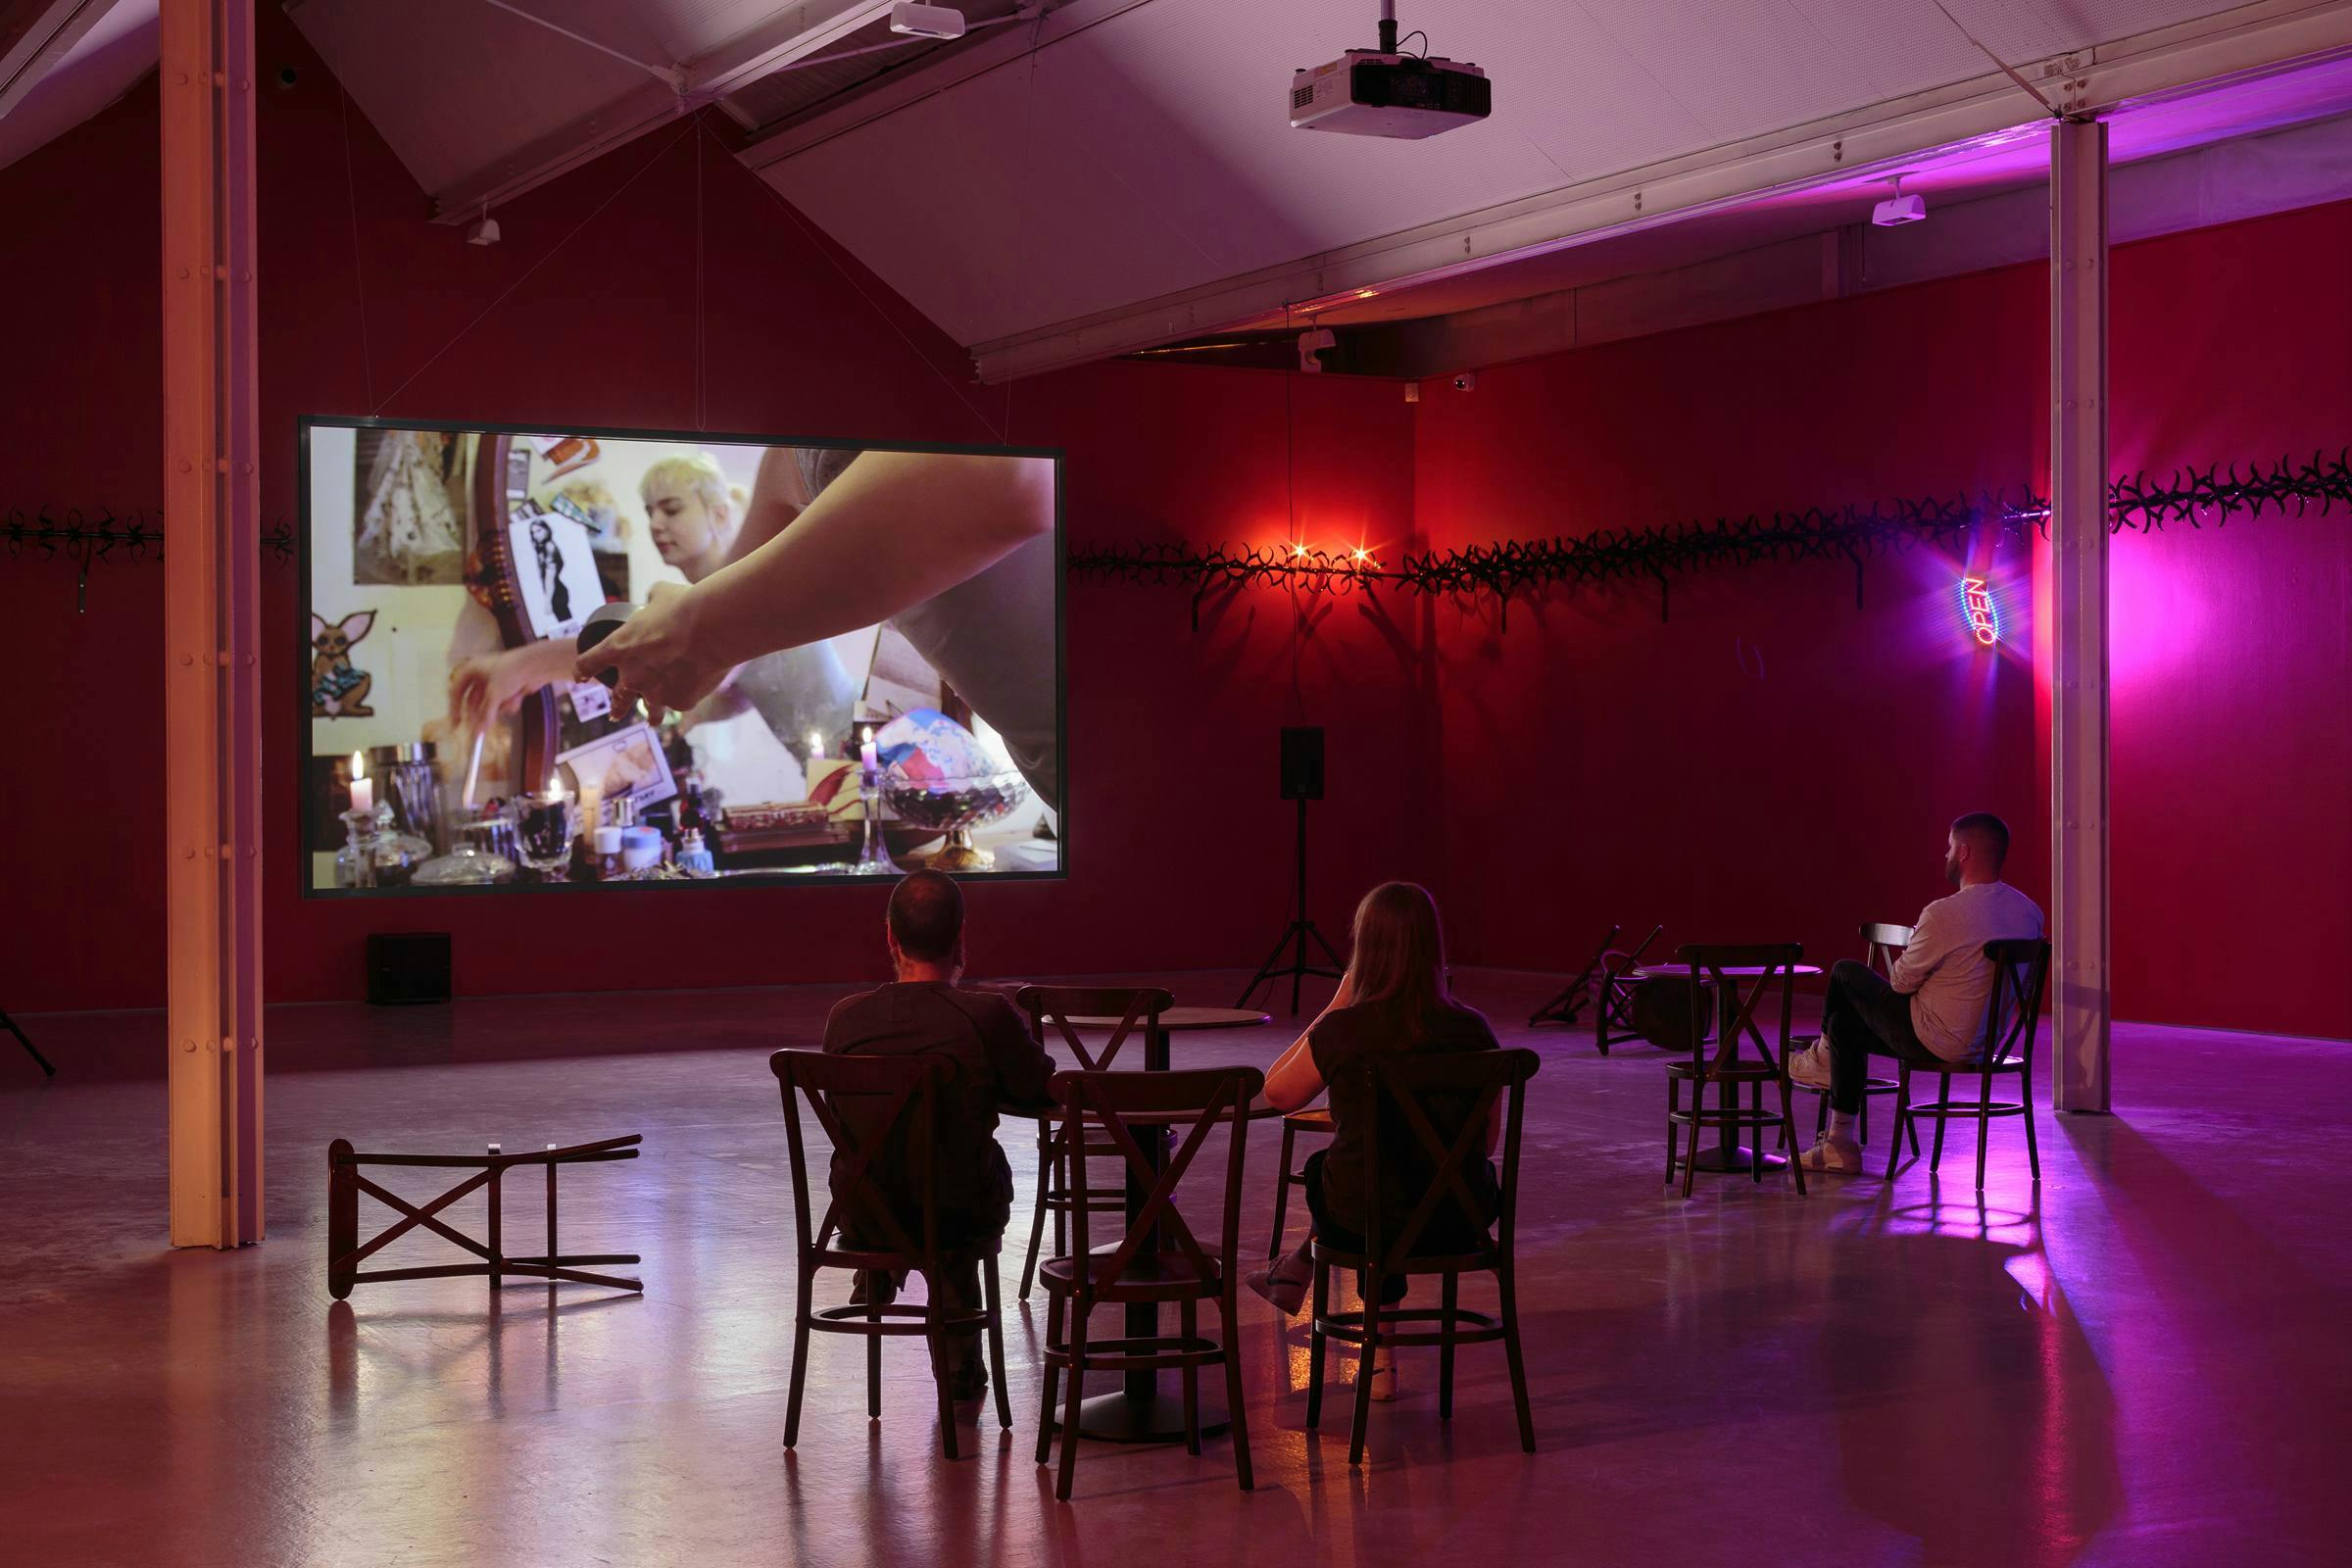 A video art work installed in a gallery space. There are a number of chairs and tables in front of the projection that 3 people are sitting on. The room is tinted with pink light.